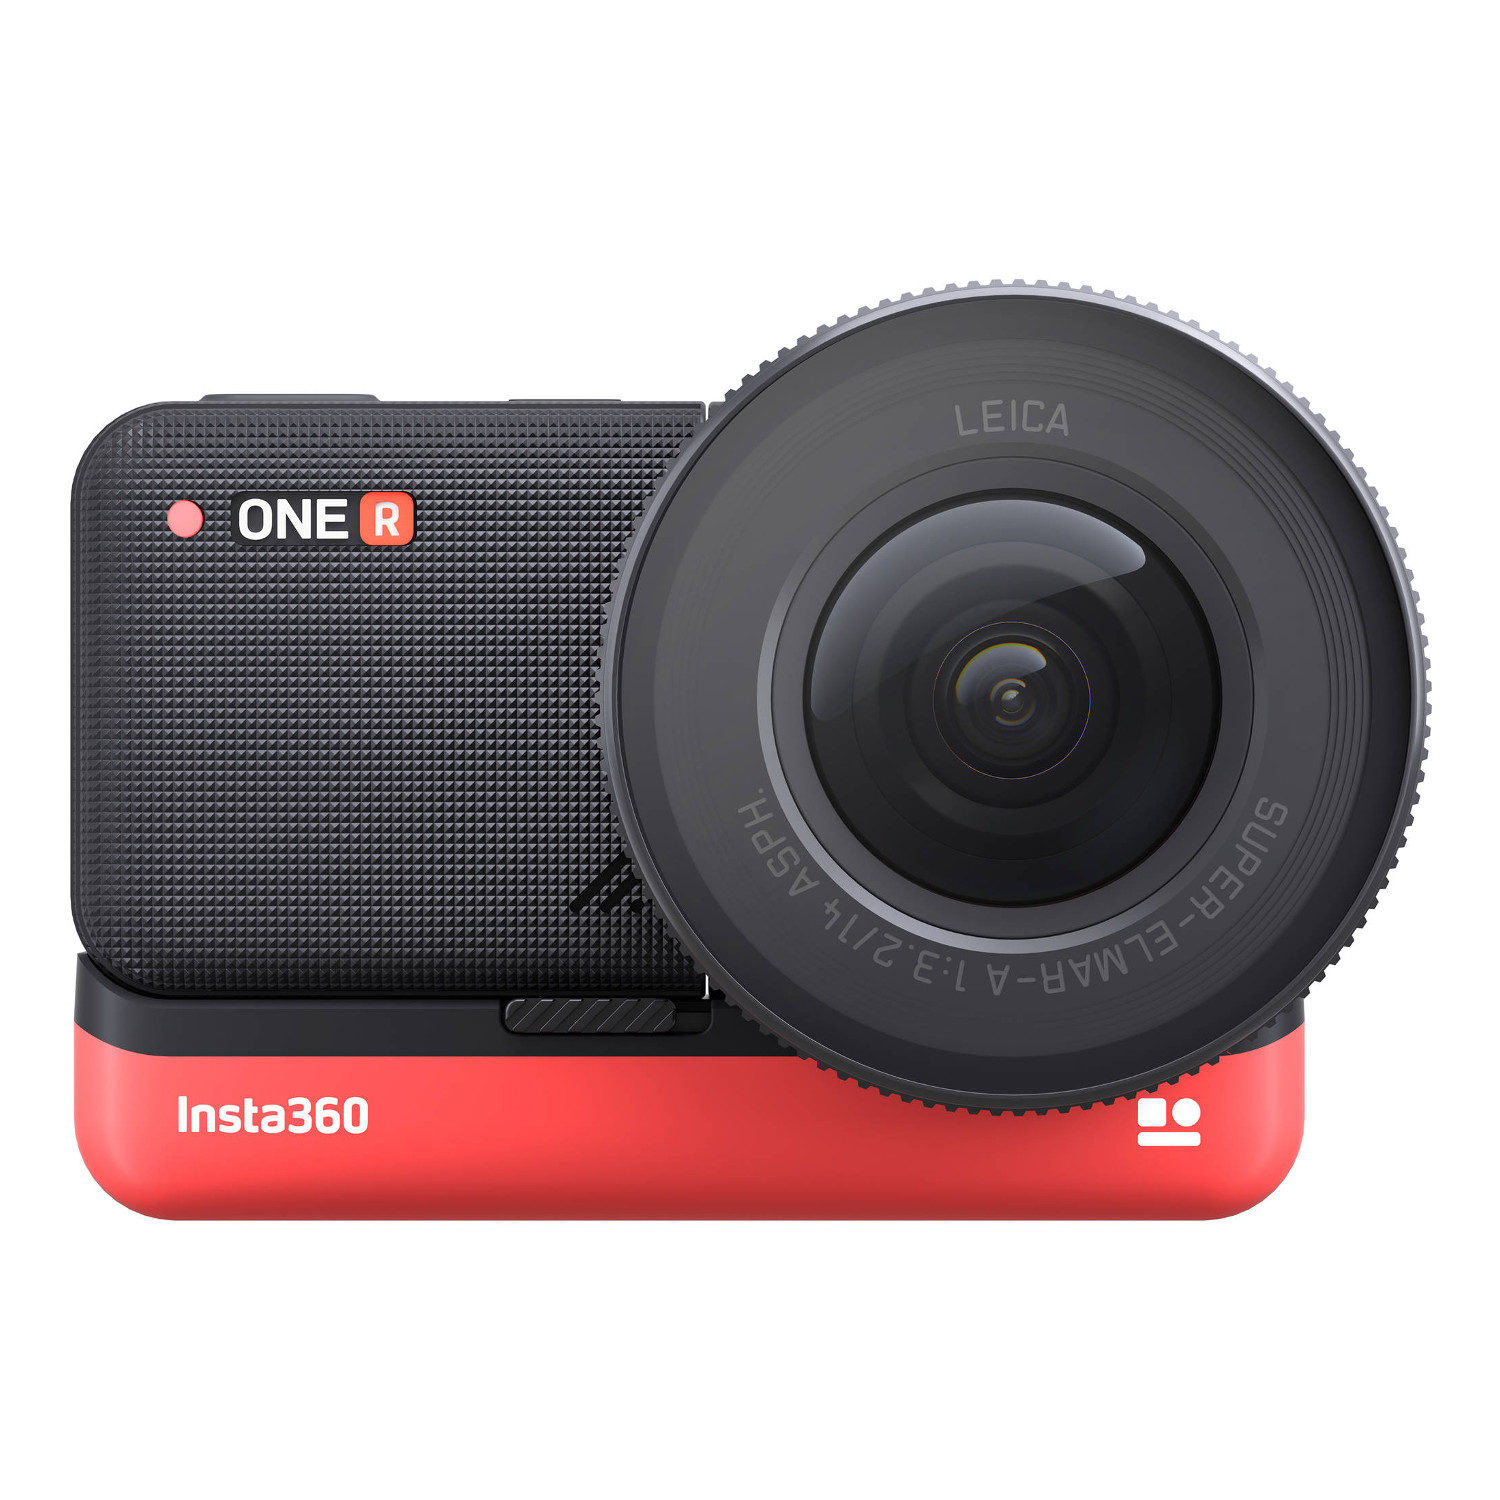 Insta360 ONE R 1-inch Edition action cam